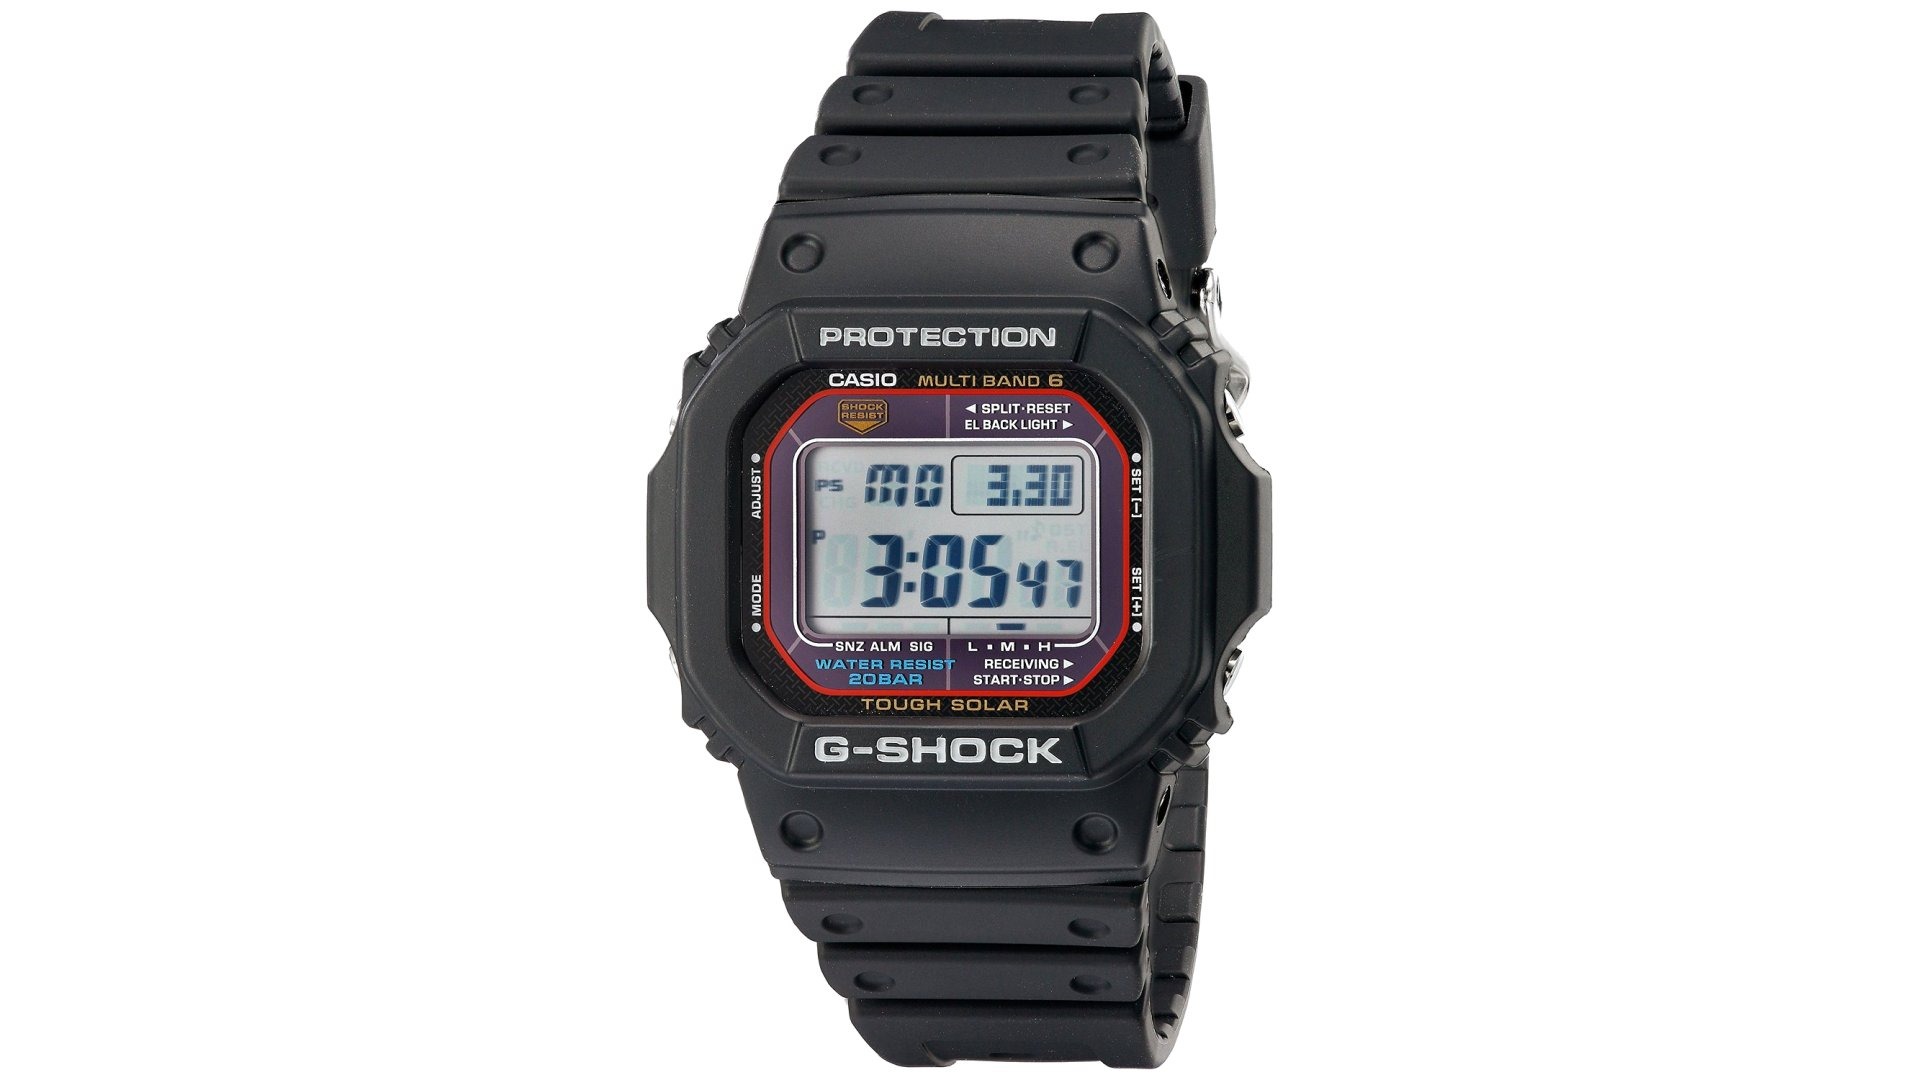 Casio G-SHOCK models I actually like